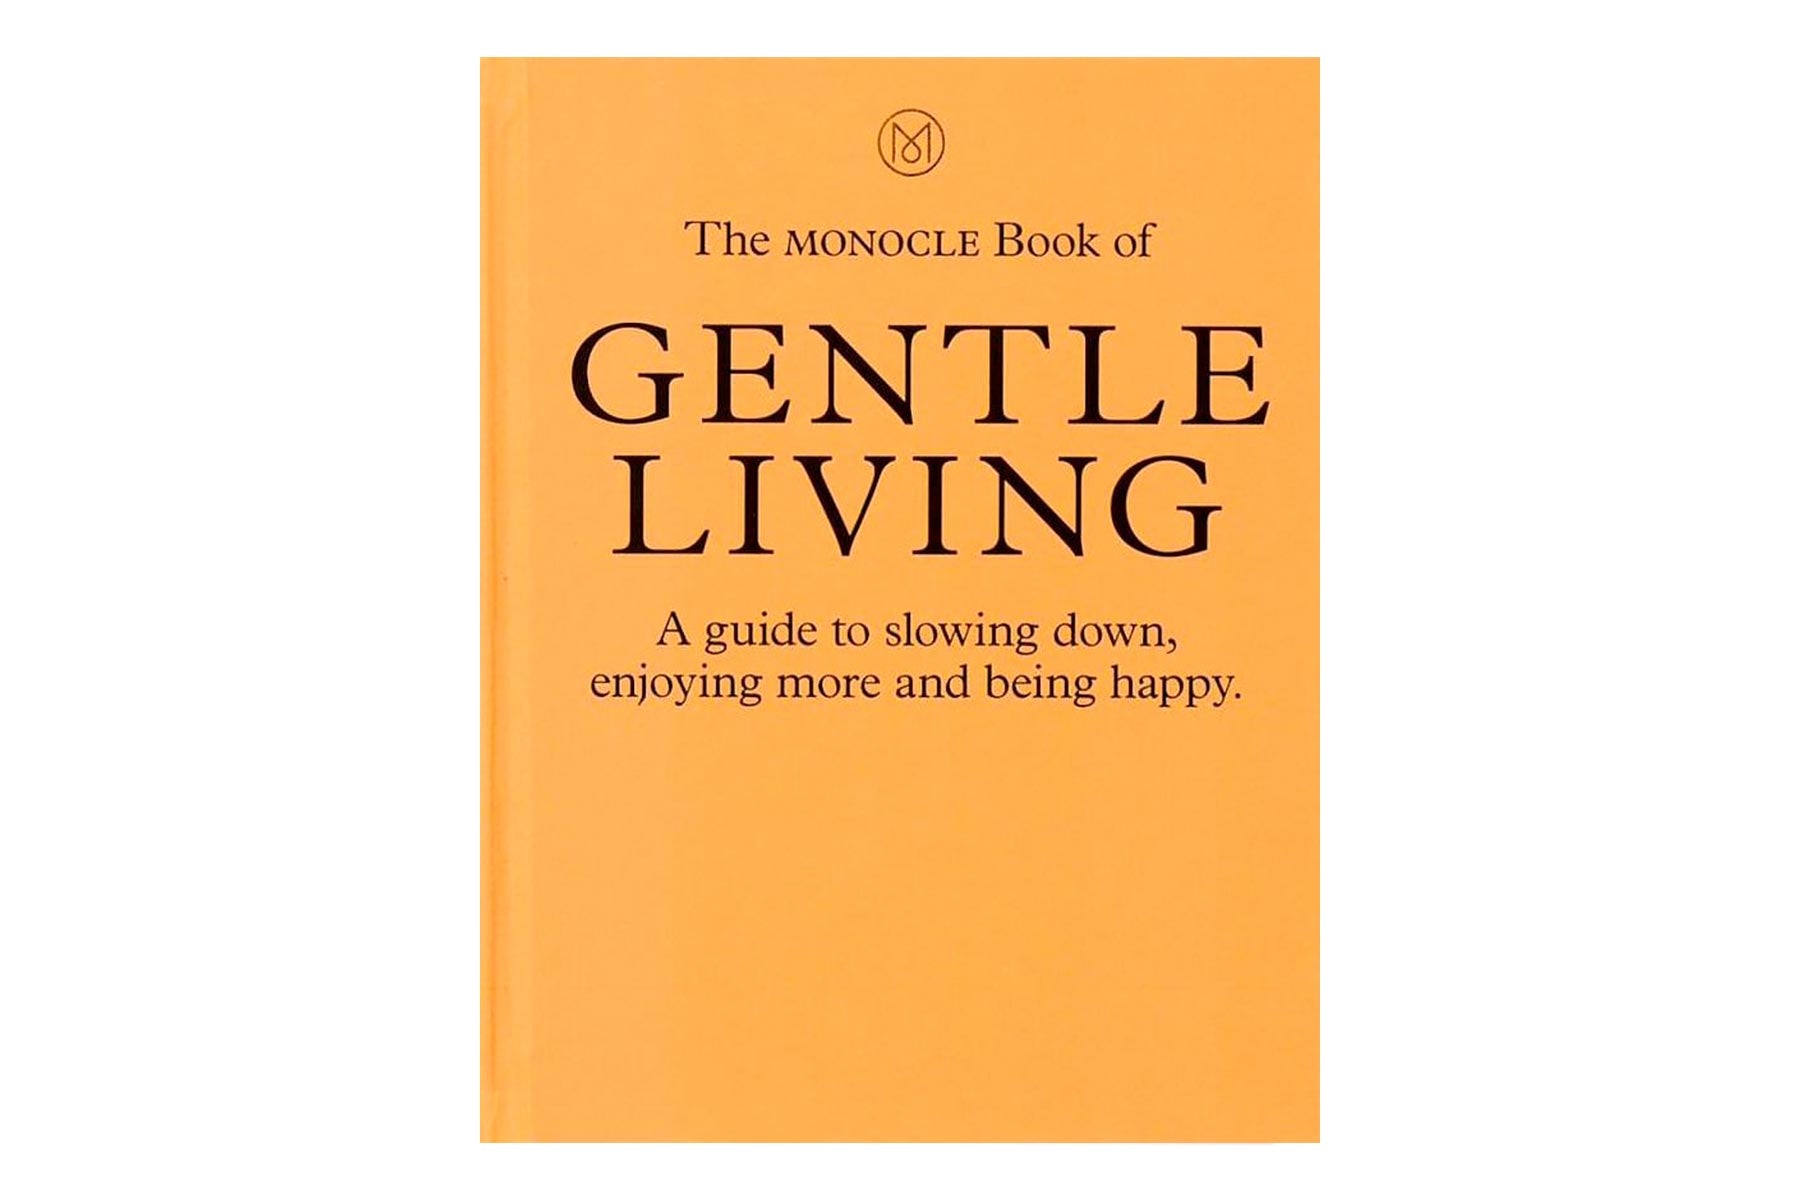 The Monocle Book of - Gentle Living